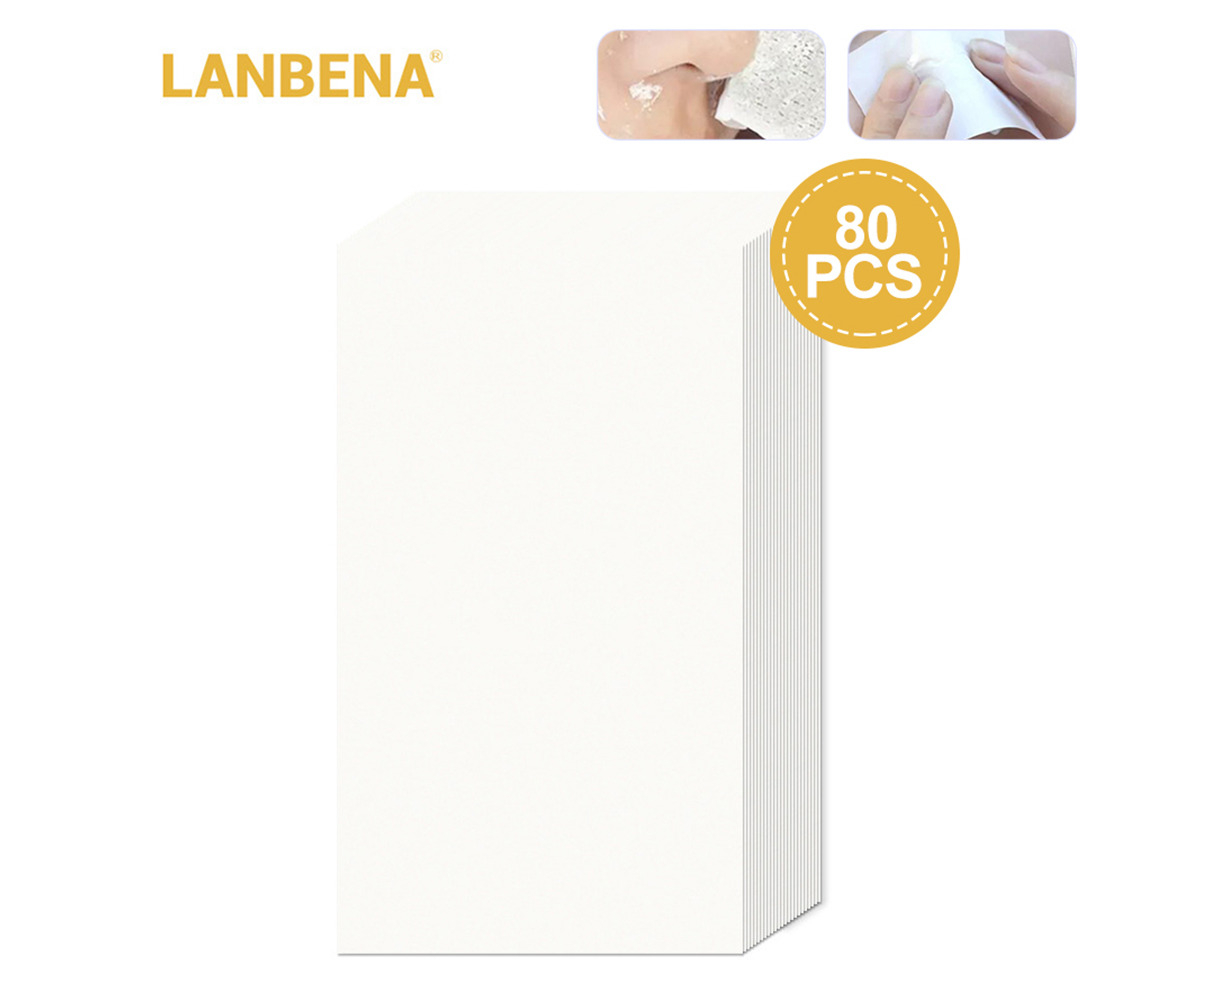 LANBENA BLACKHEAD REMOVER MASK - Price in India, Buy LANBENA BLACKHEAD  REMOVER MASK Online In India, Reviews, Ratings & Features